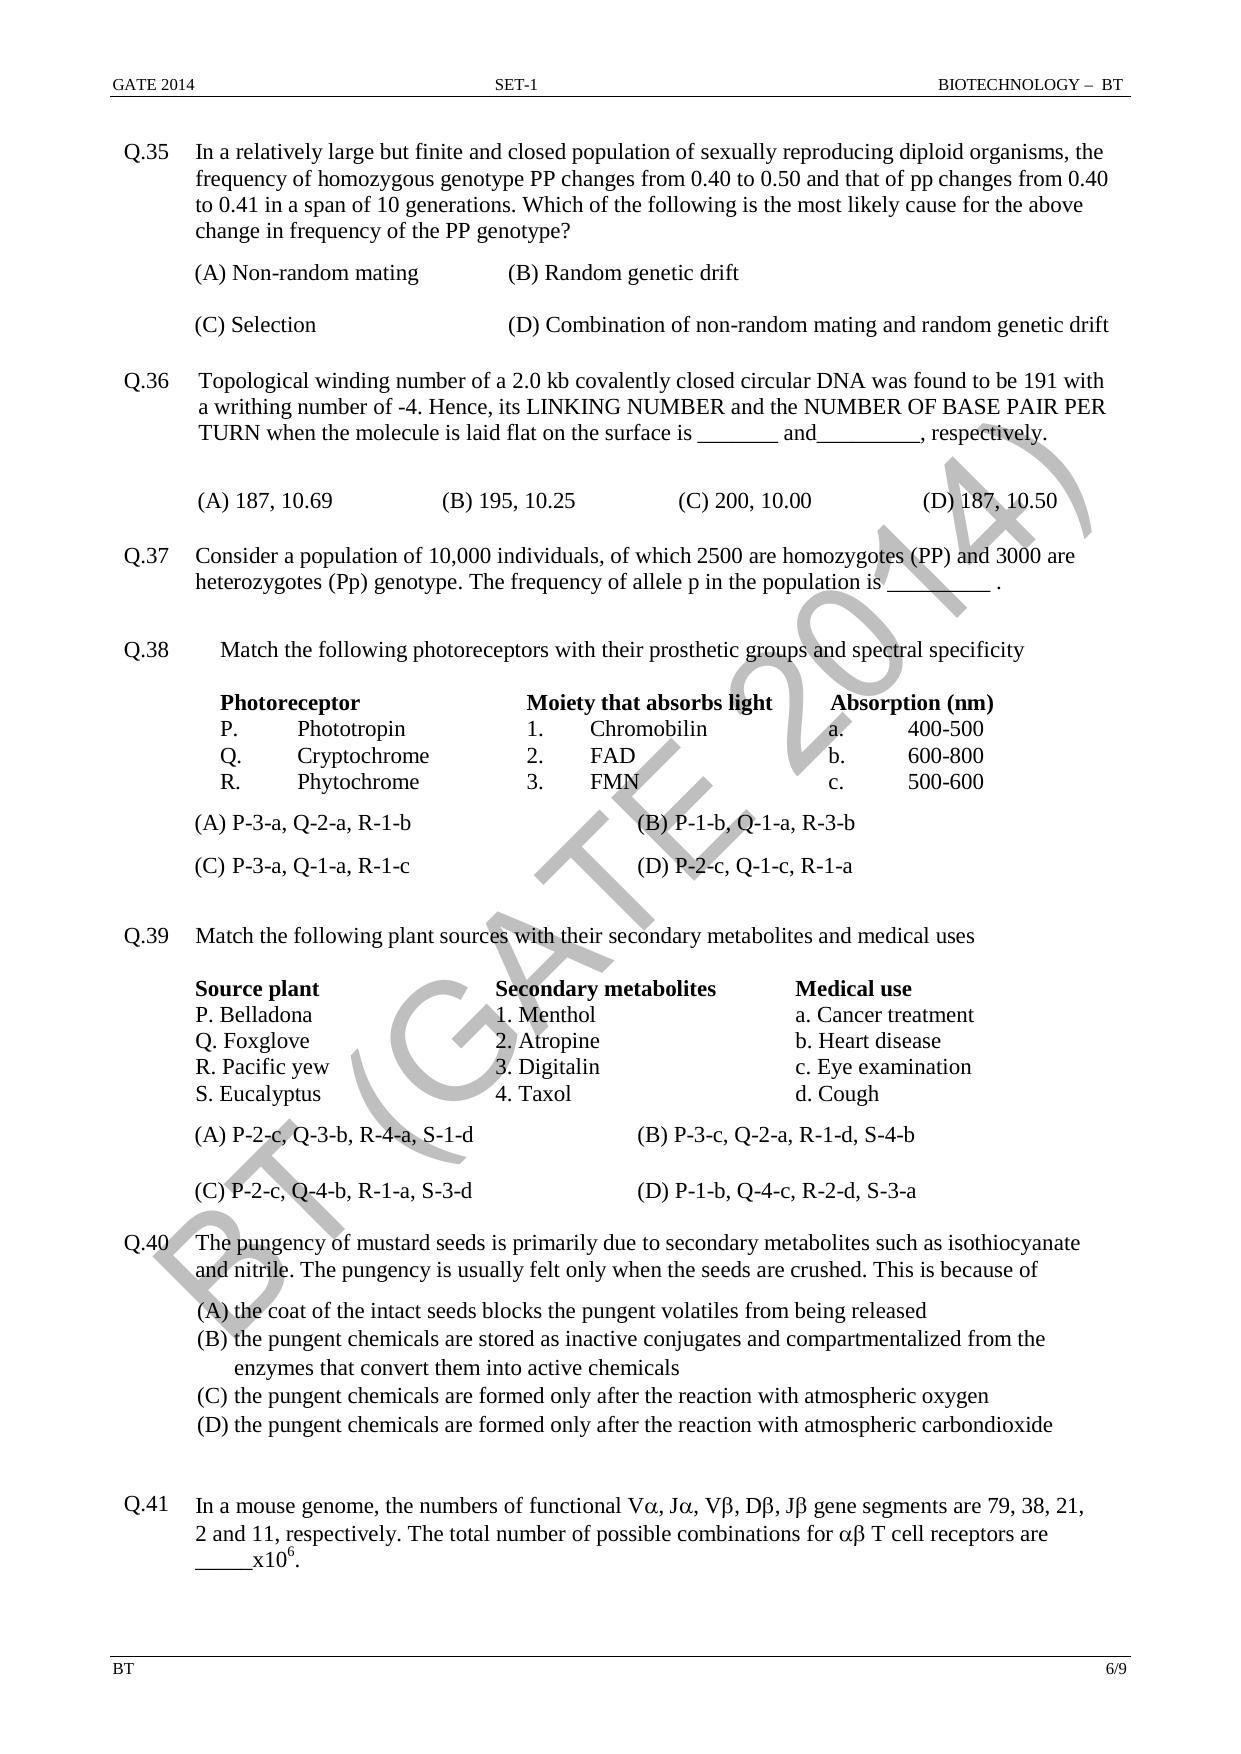 GATE 2014 Biotechnology (BT) Question Paper with Answer Key - Page 12